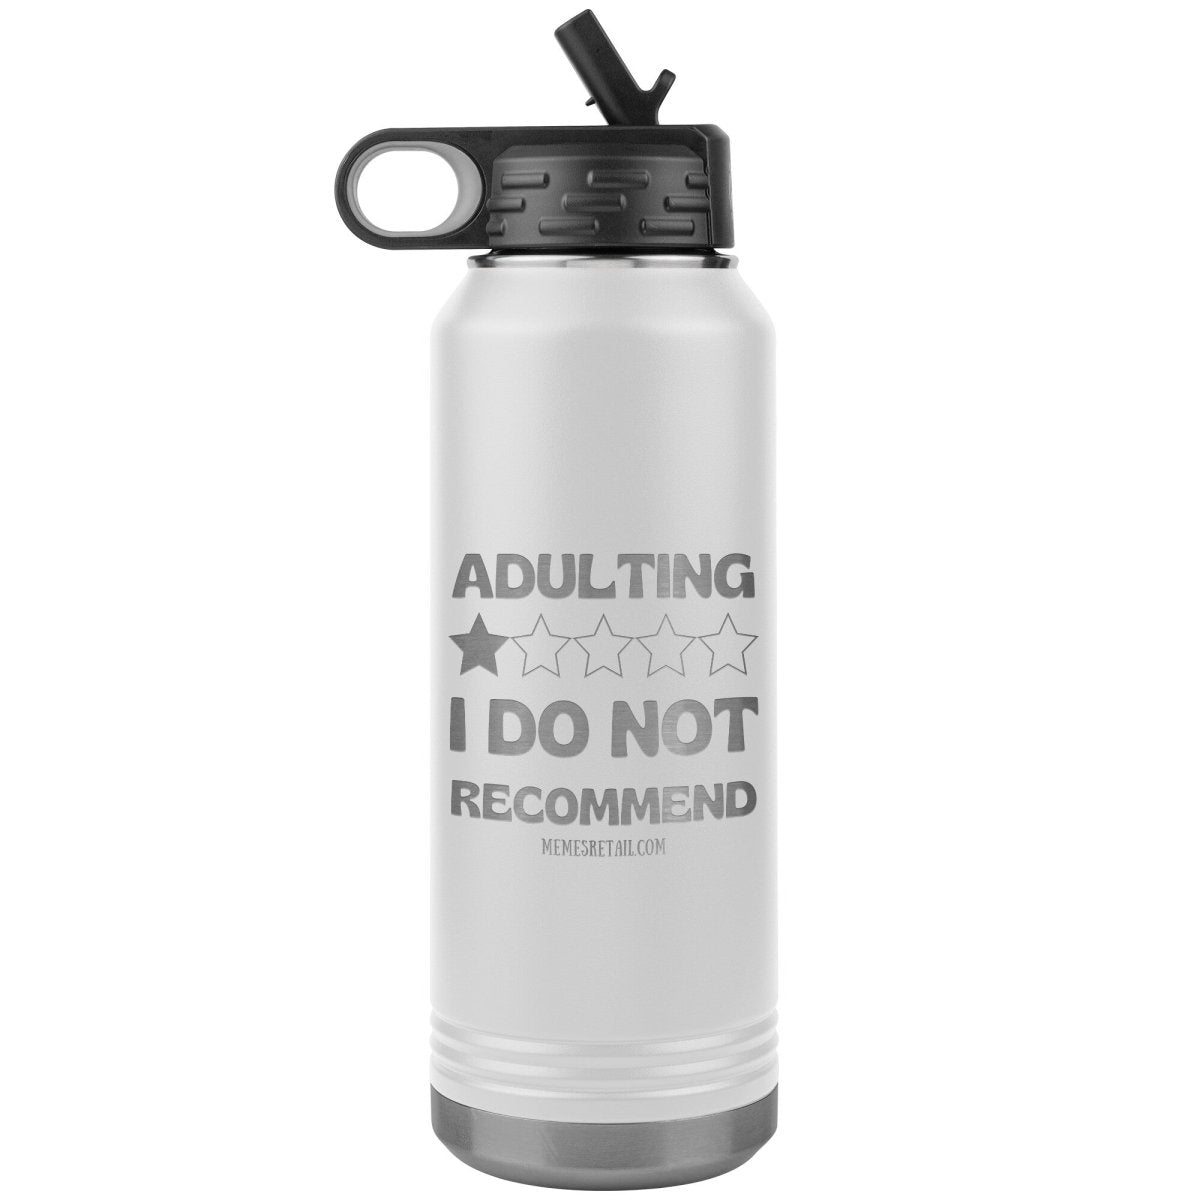 Adulting, 1 Star, I do not recommend 32oz Water Tumblers, White - MemesRetail.com